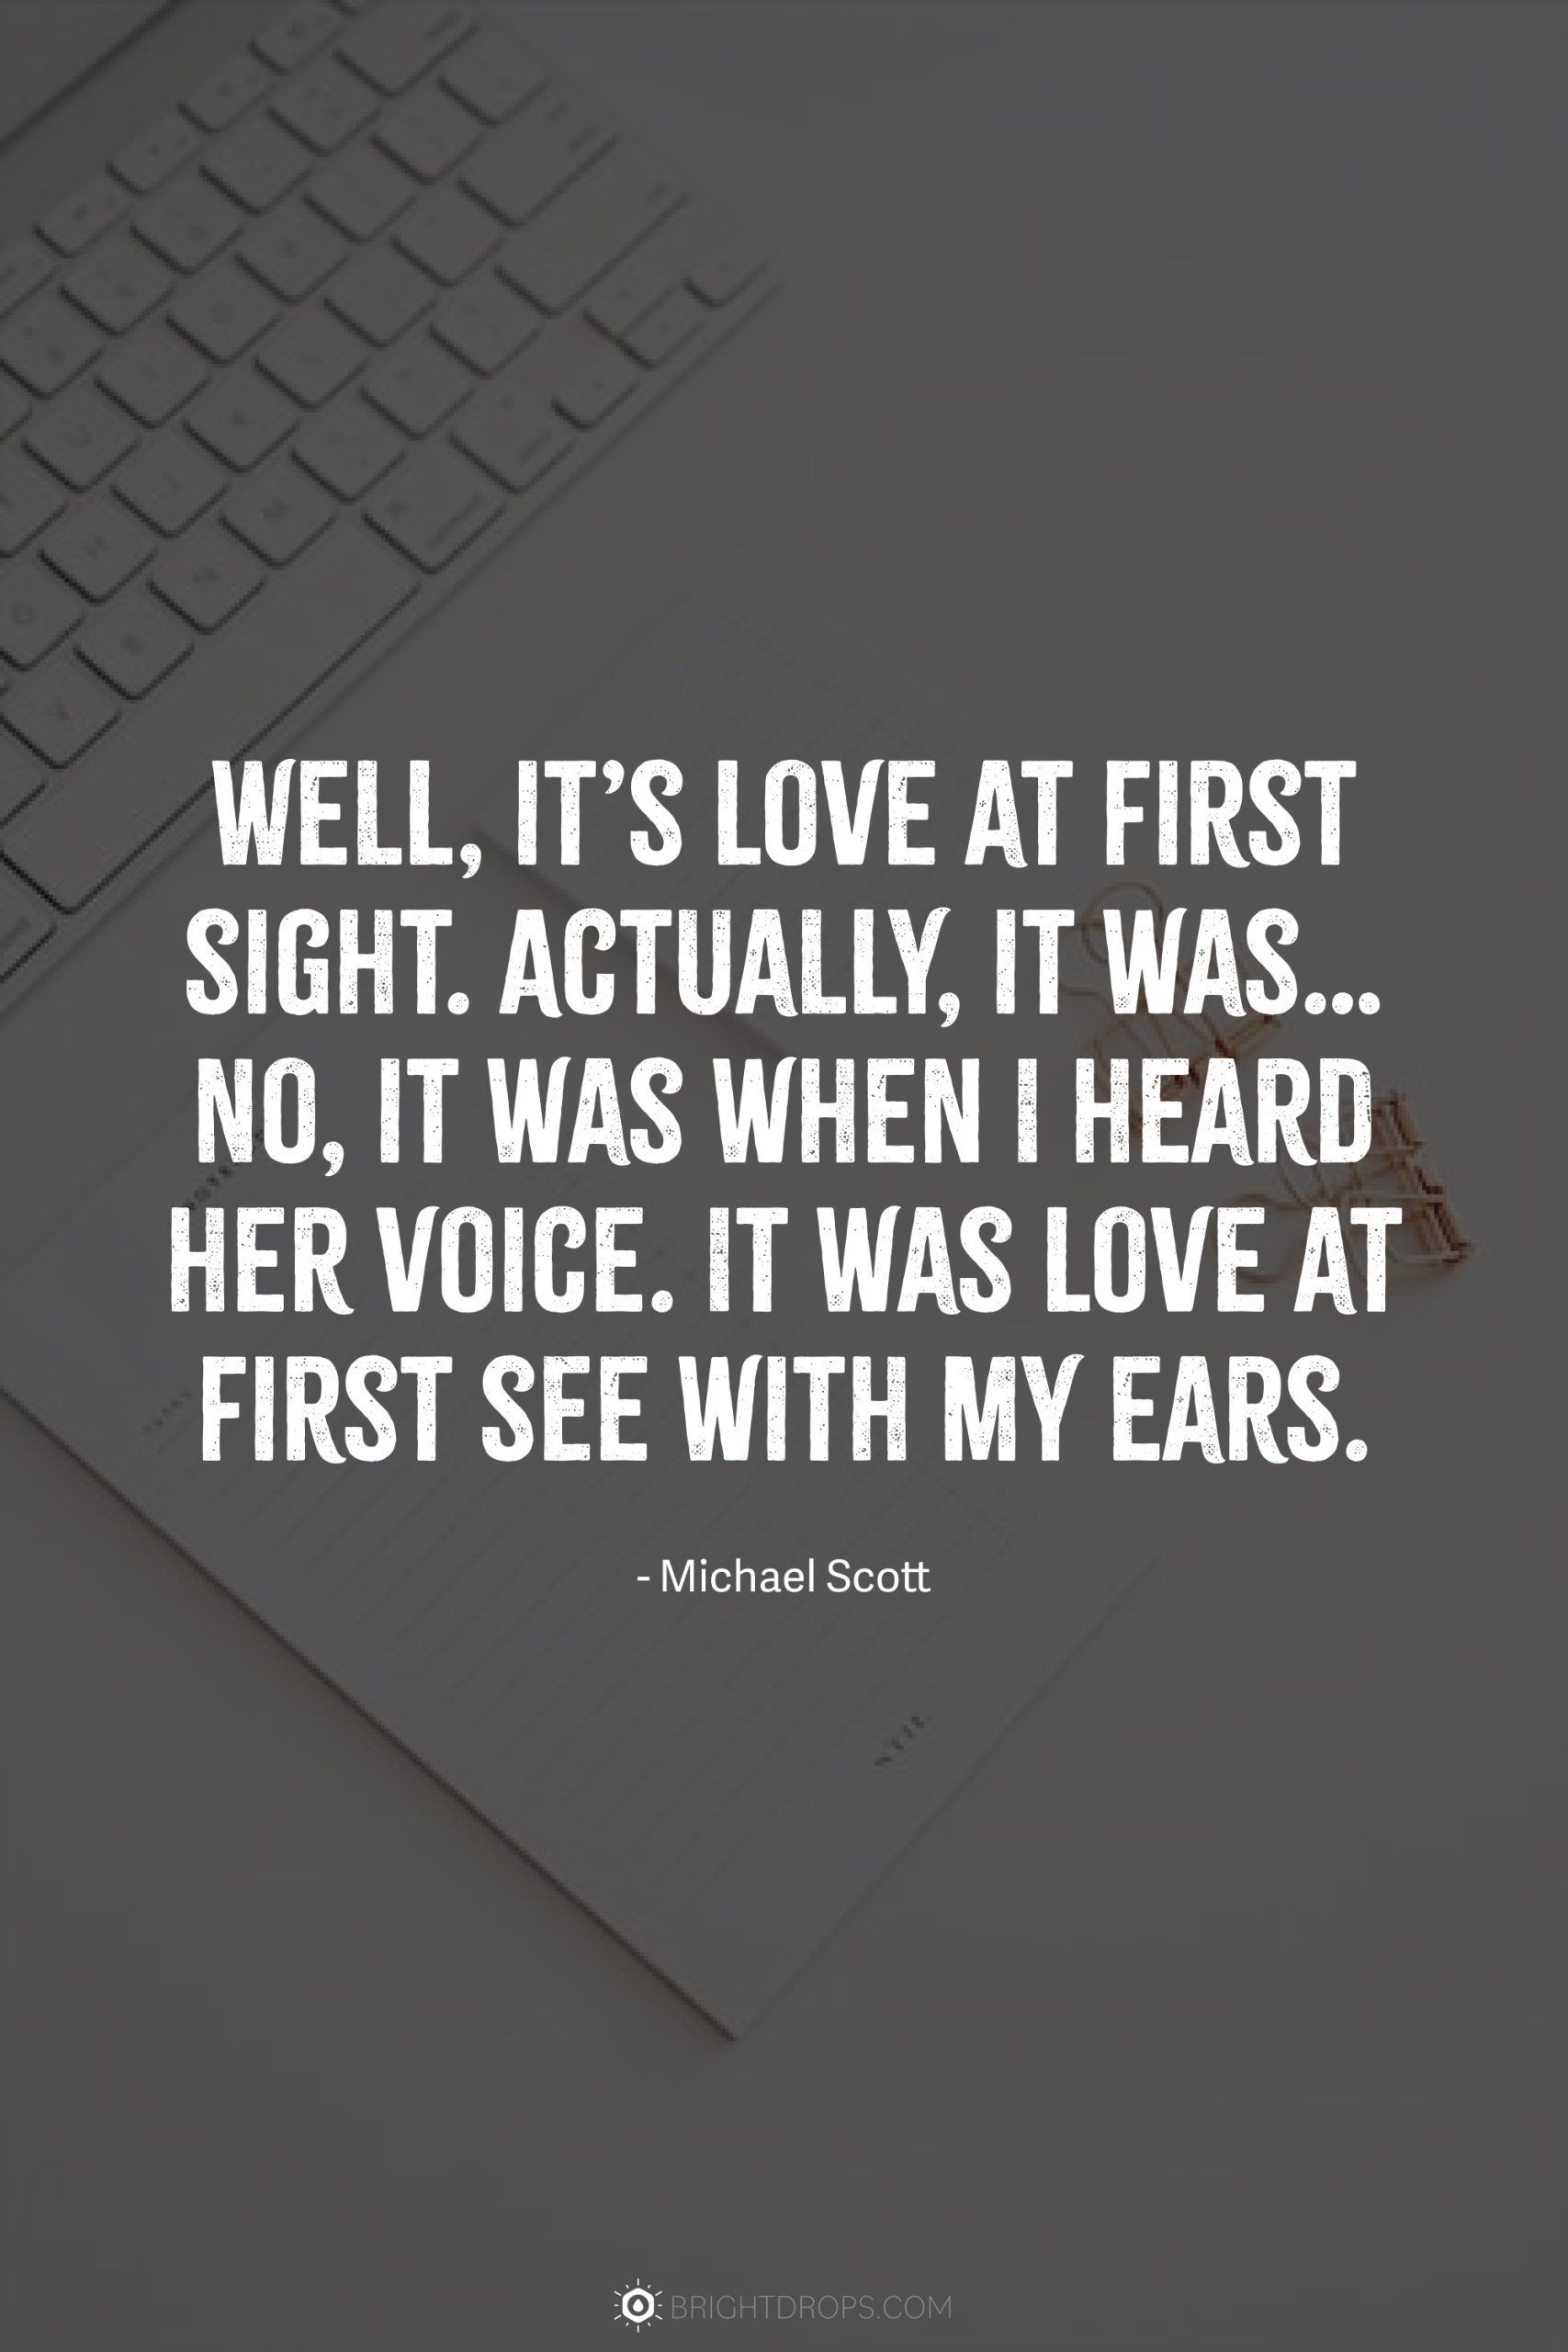 Well, it’s love at first sight. Actually, it was… No, it was when I heard her voice. It was love at first see with my ears.